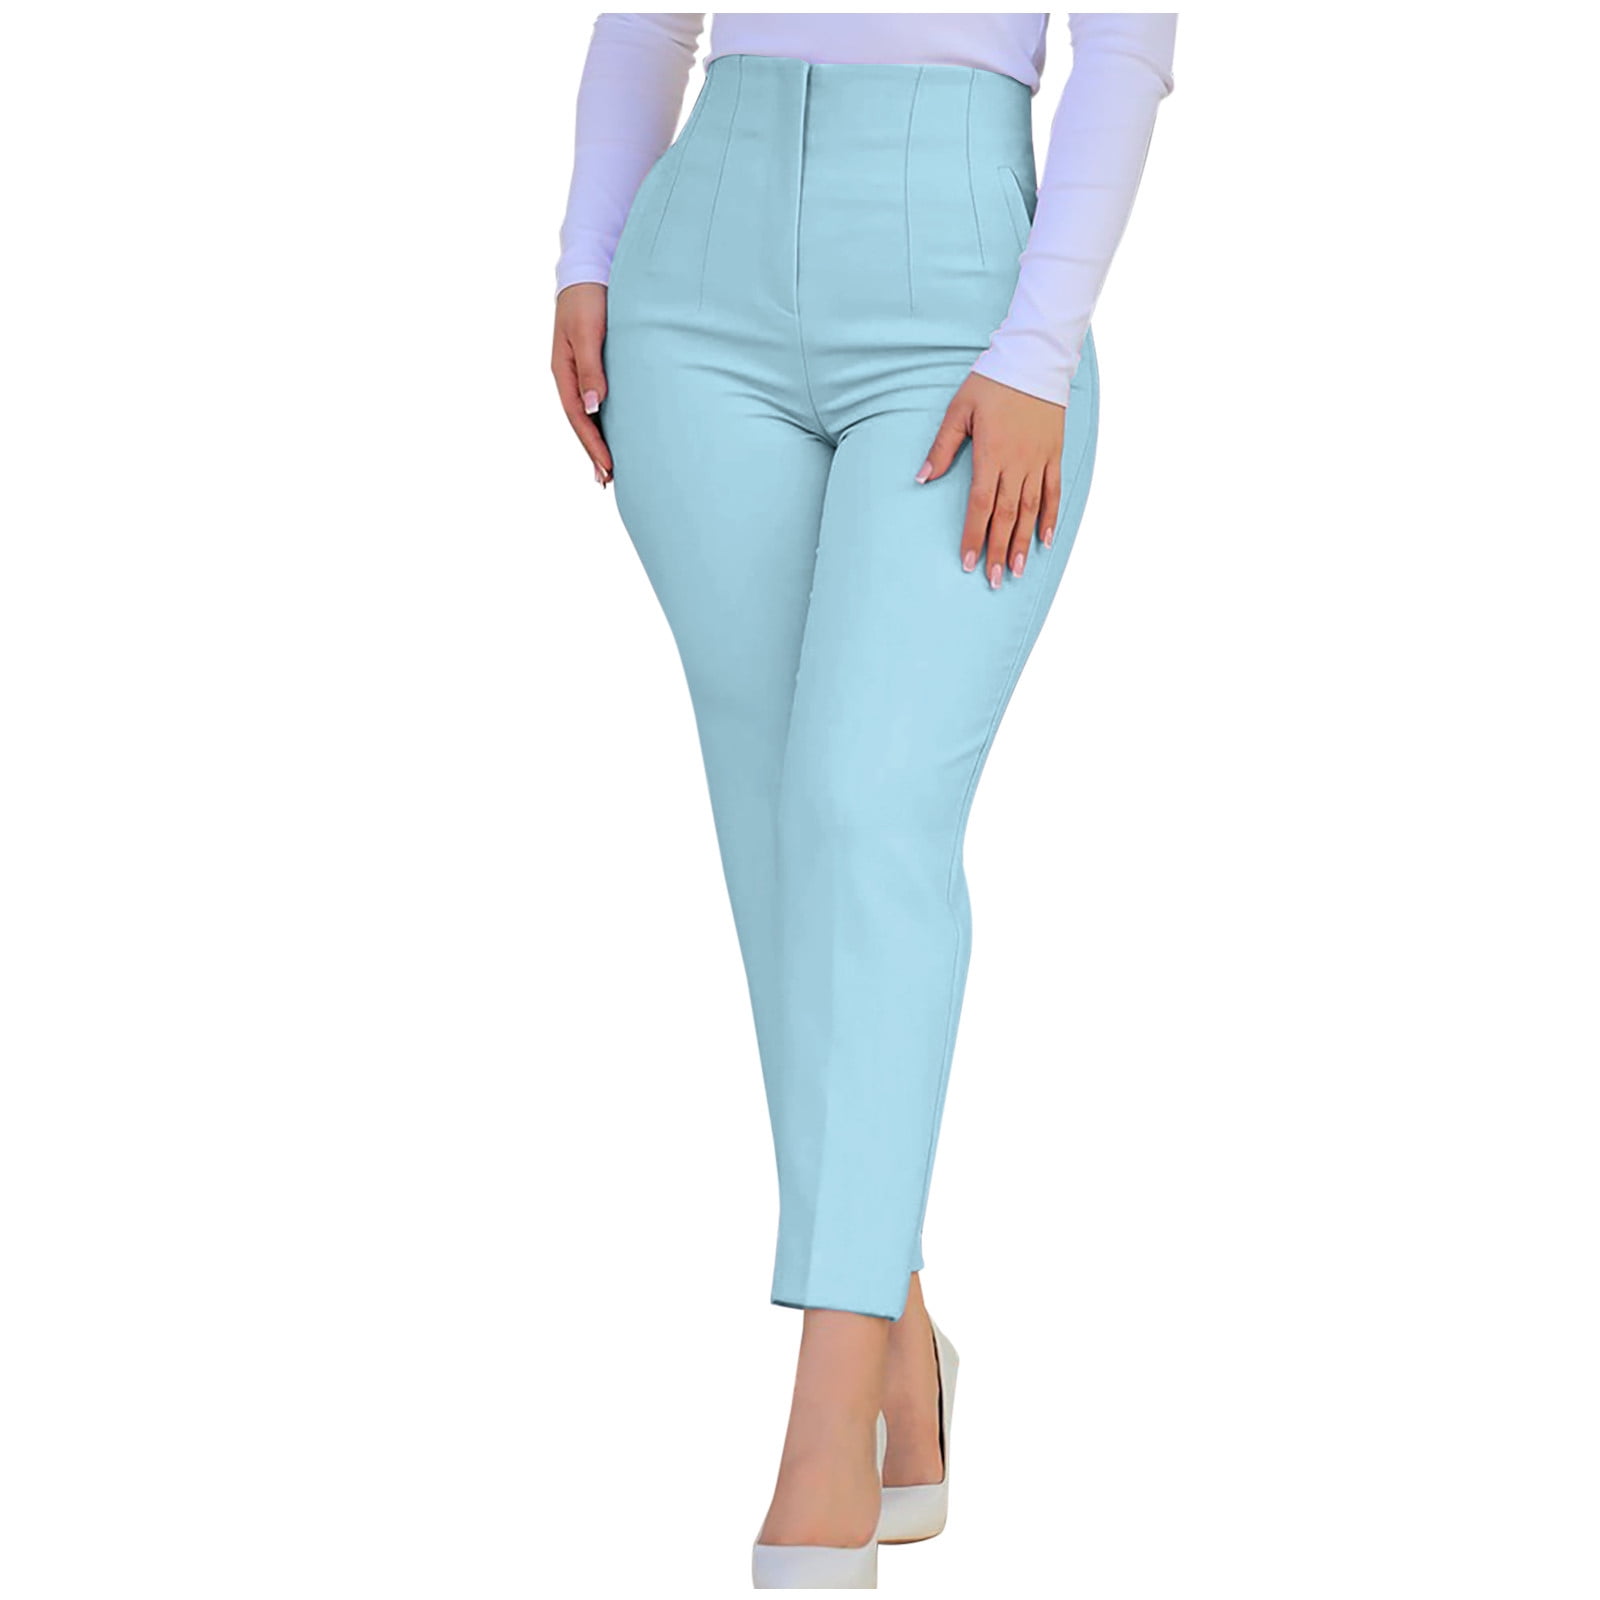 Ginasy Dress Pants for Women Business Casual Stretch Pull On Work Office Dressy  Leggings Skinny Trousers with Pockets Blue - Bass River Shoes